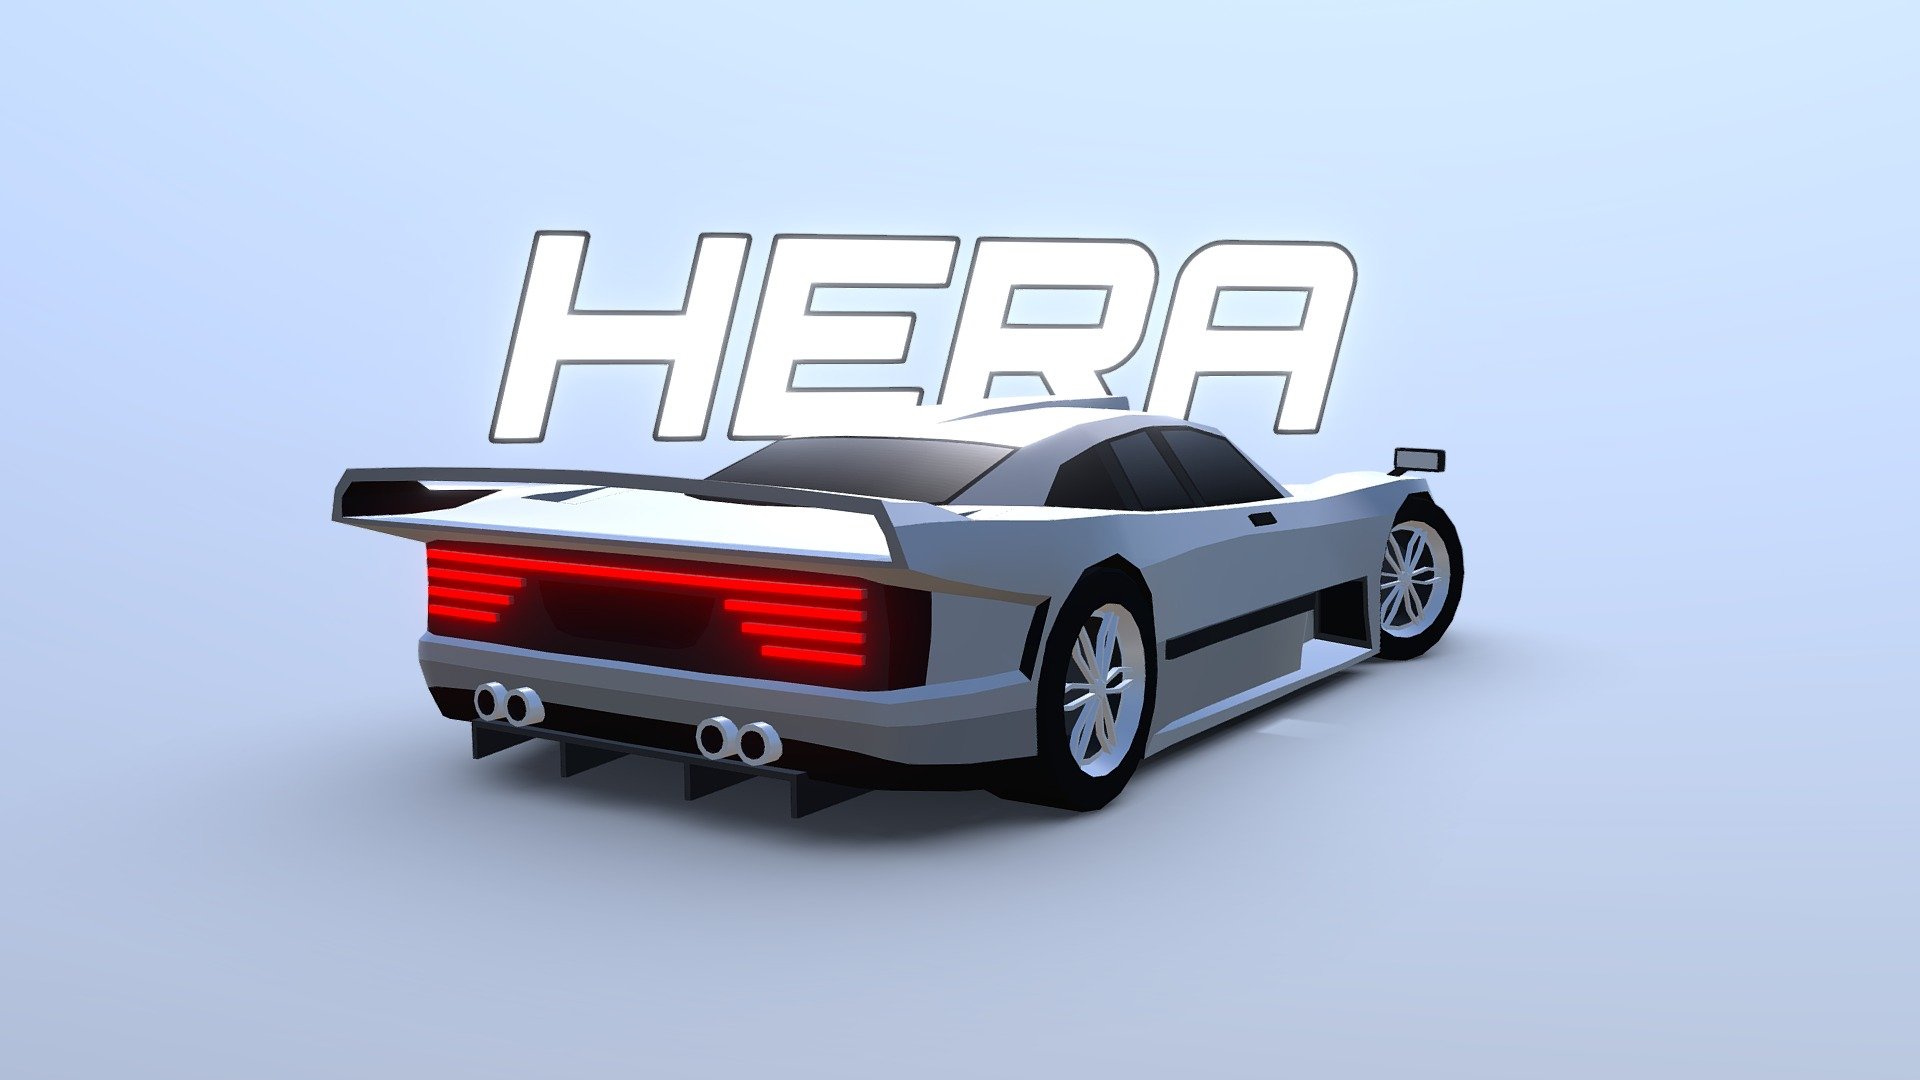 This car will be included in the August 2022 update of ARCADE: Ultimate Vehicles Pack 3d model